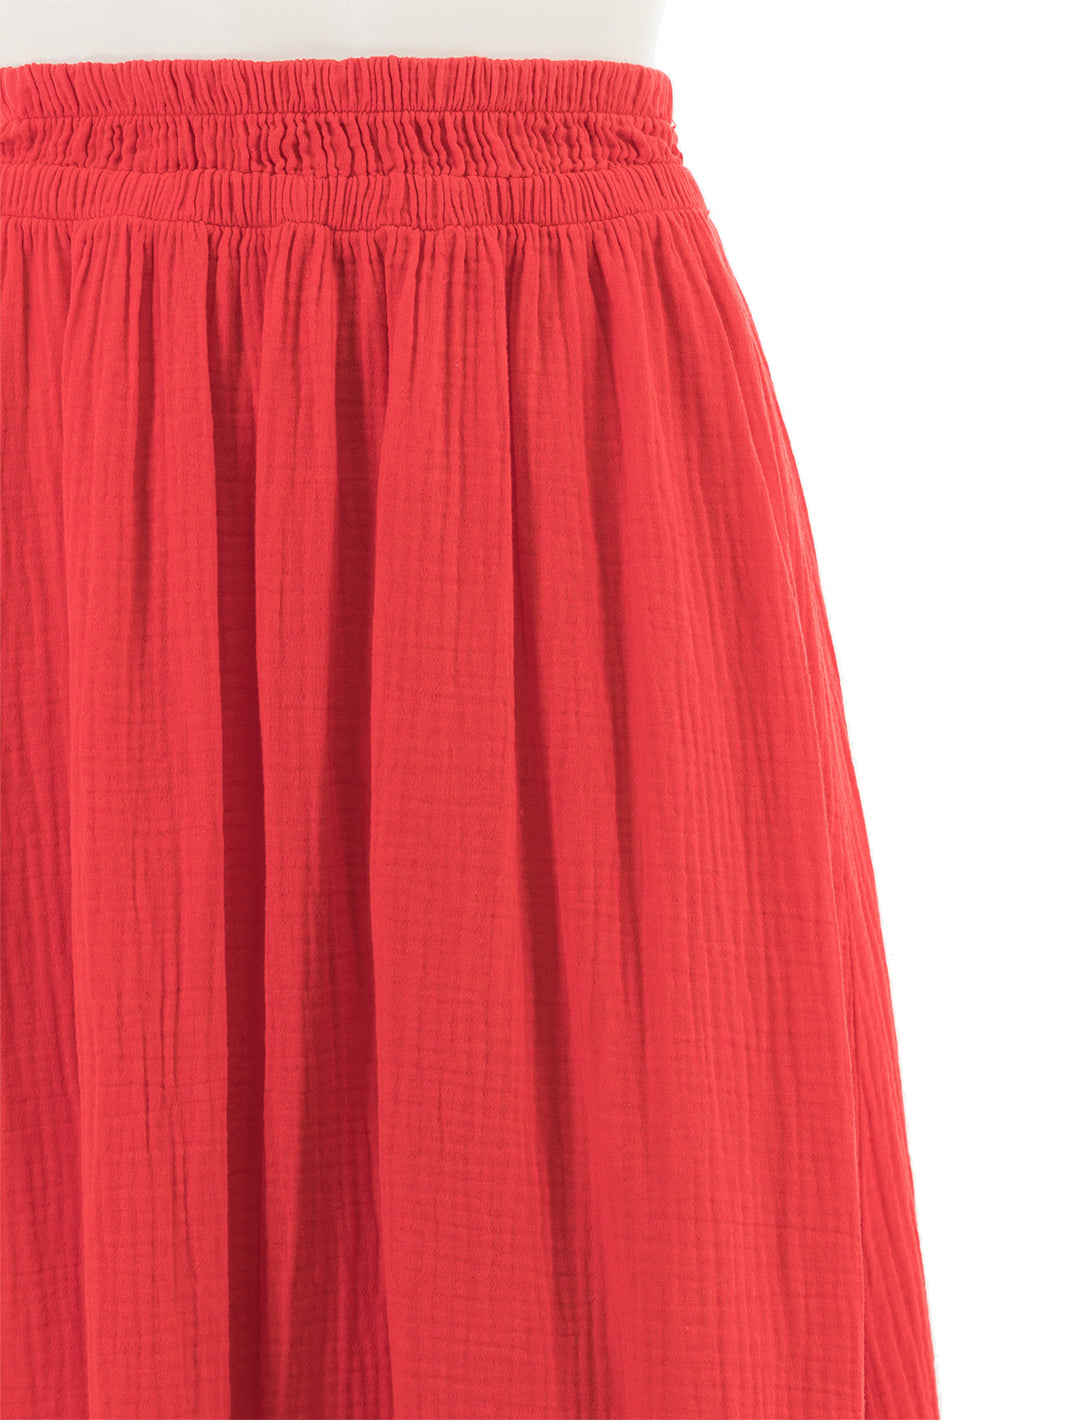 Close-up view of Nation LTD's safa skirt in cherry bomb.